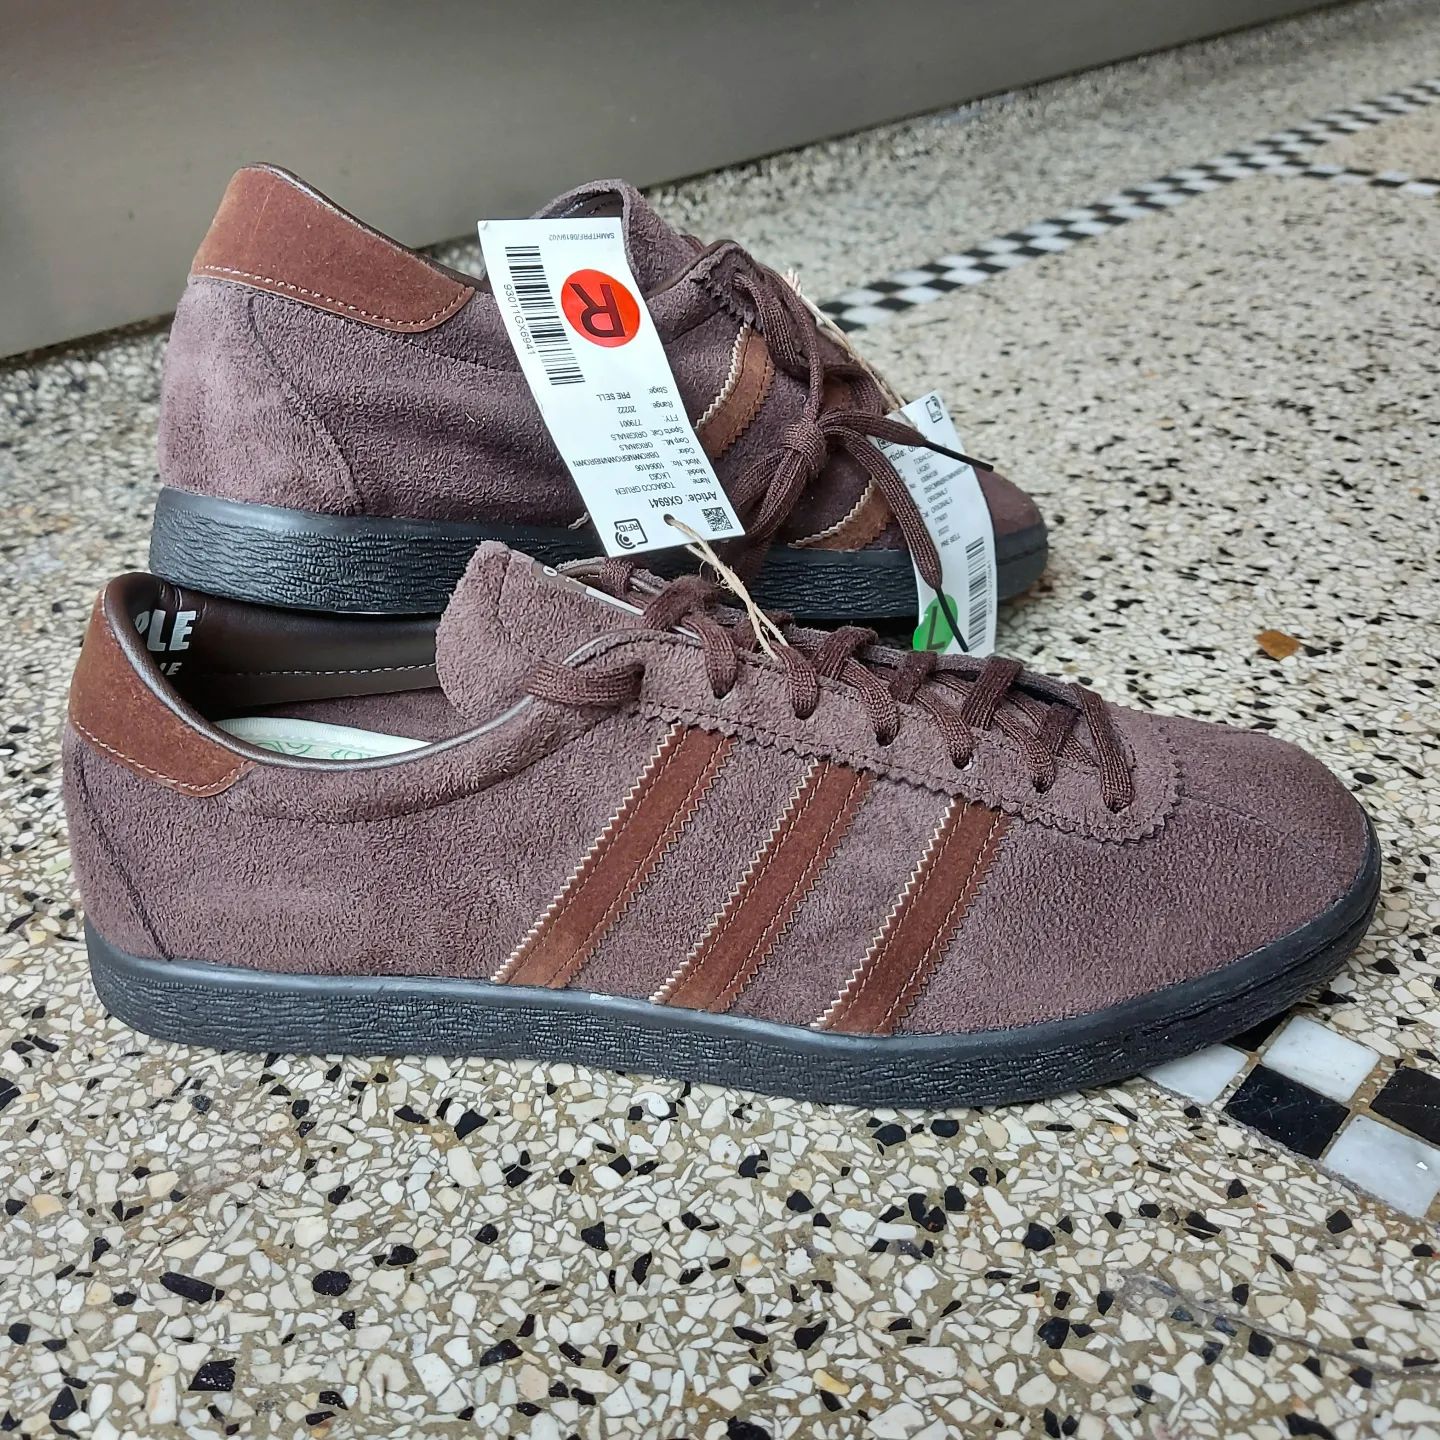 lavar Siesta carta Martin on Twitter: "Tobacco 2022 sample 🔥🔥🔥 hope these get a release # adidas #Tobacco https://t.co/pPh38V6Zaq" / Twitter